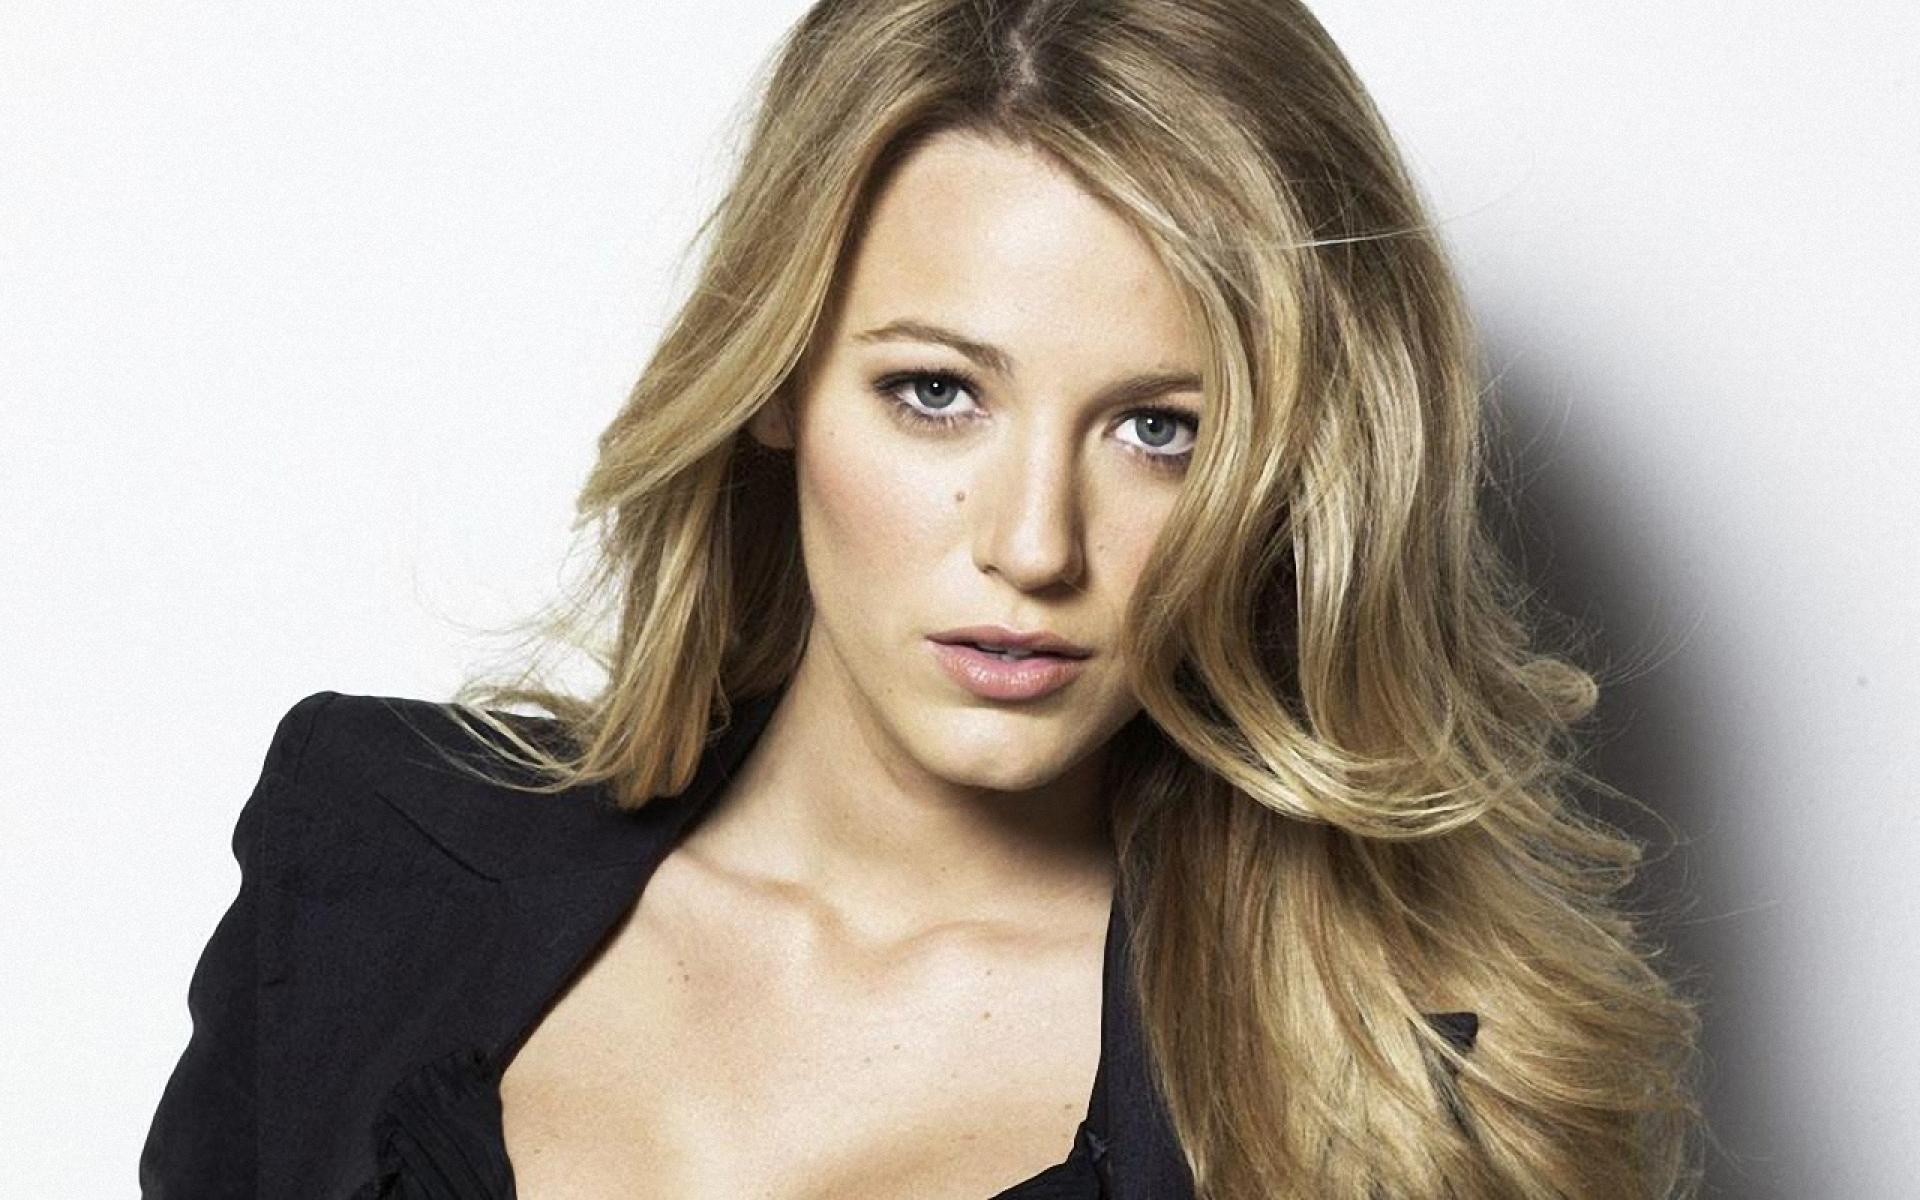 Blake Lively Wallpapers High Resolution and Quality Download